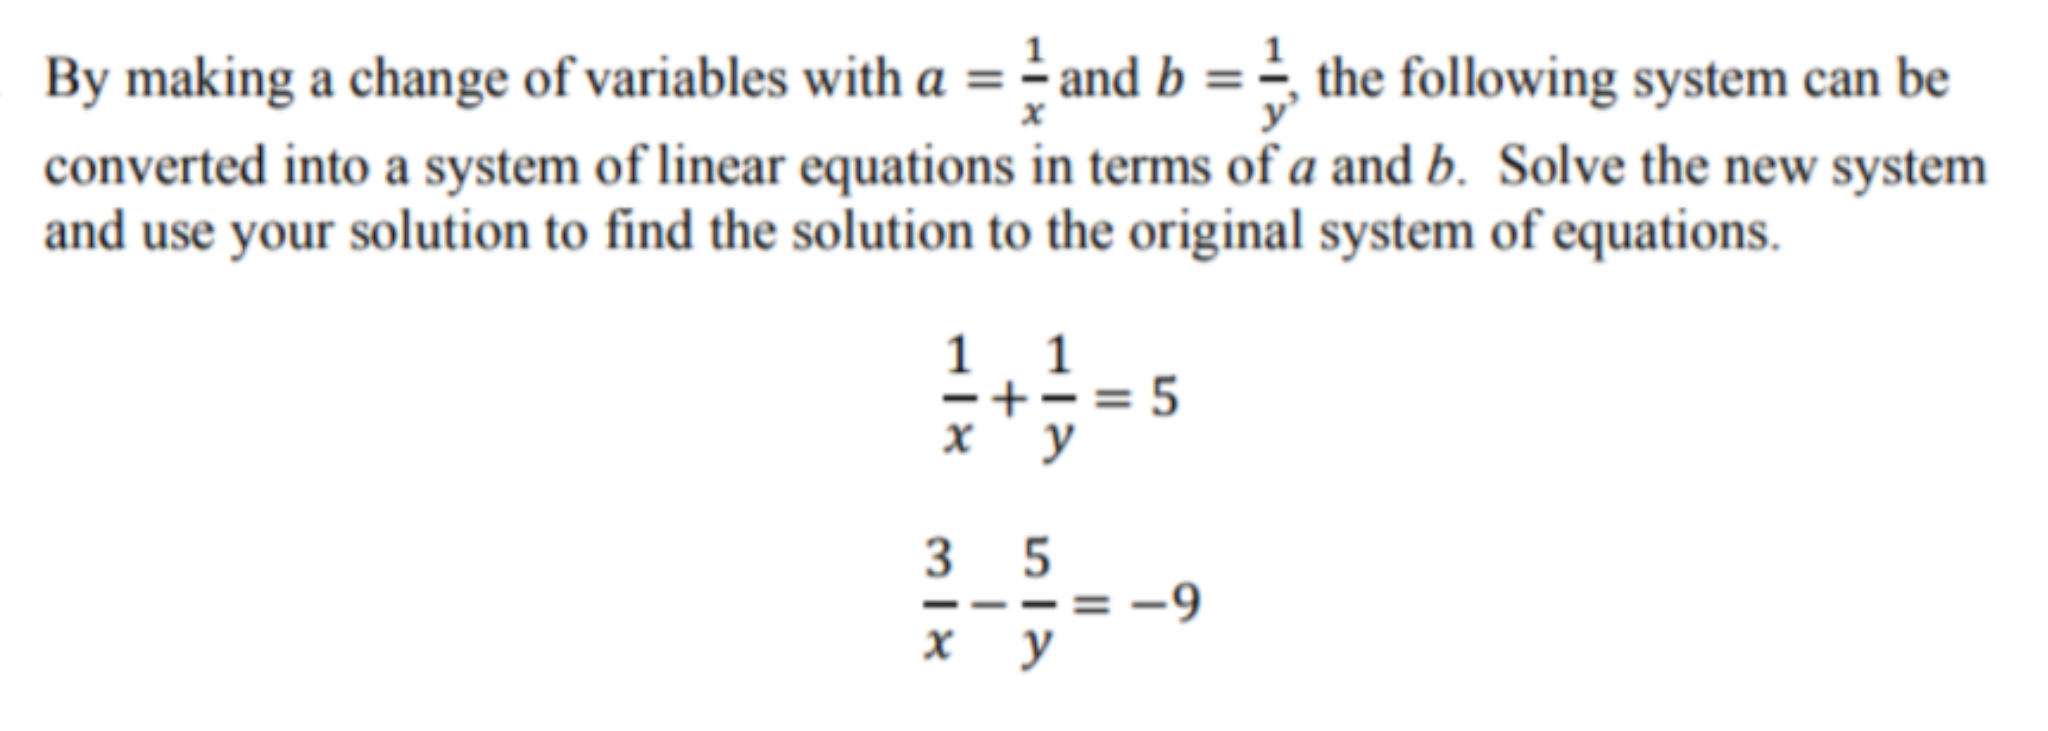 By making a change of variables with a = ÷ and b = the following system can be
y'
converted into a system of linear equations in terms of a and b. Solve the new system
and use your solution to find the solution to the original system of equations.
1 1
-+-= 5
х у
3 5
= -9
х у
